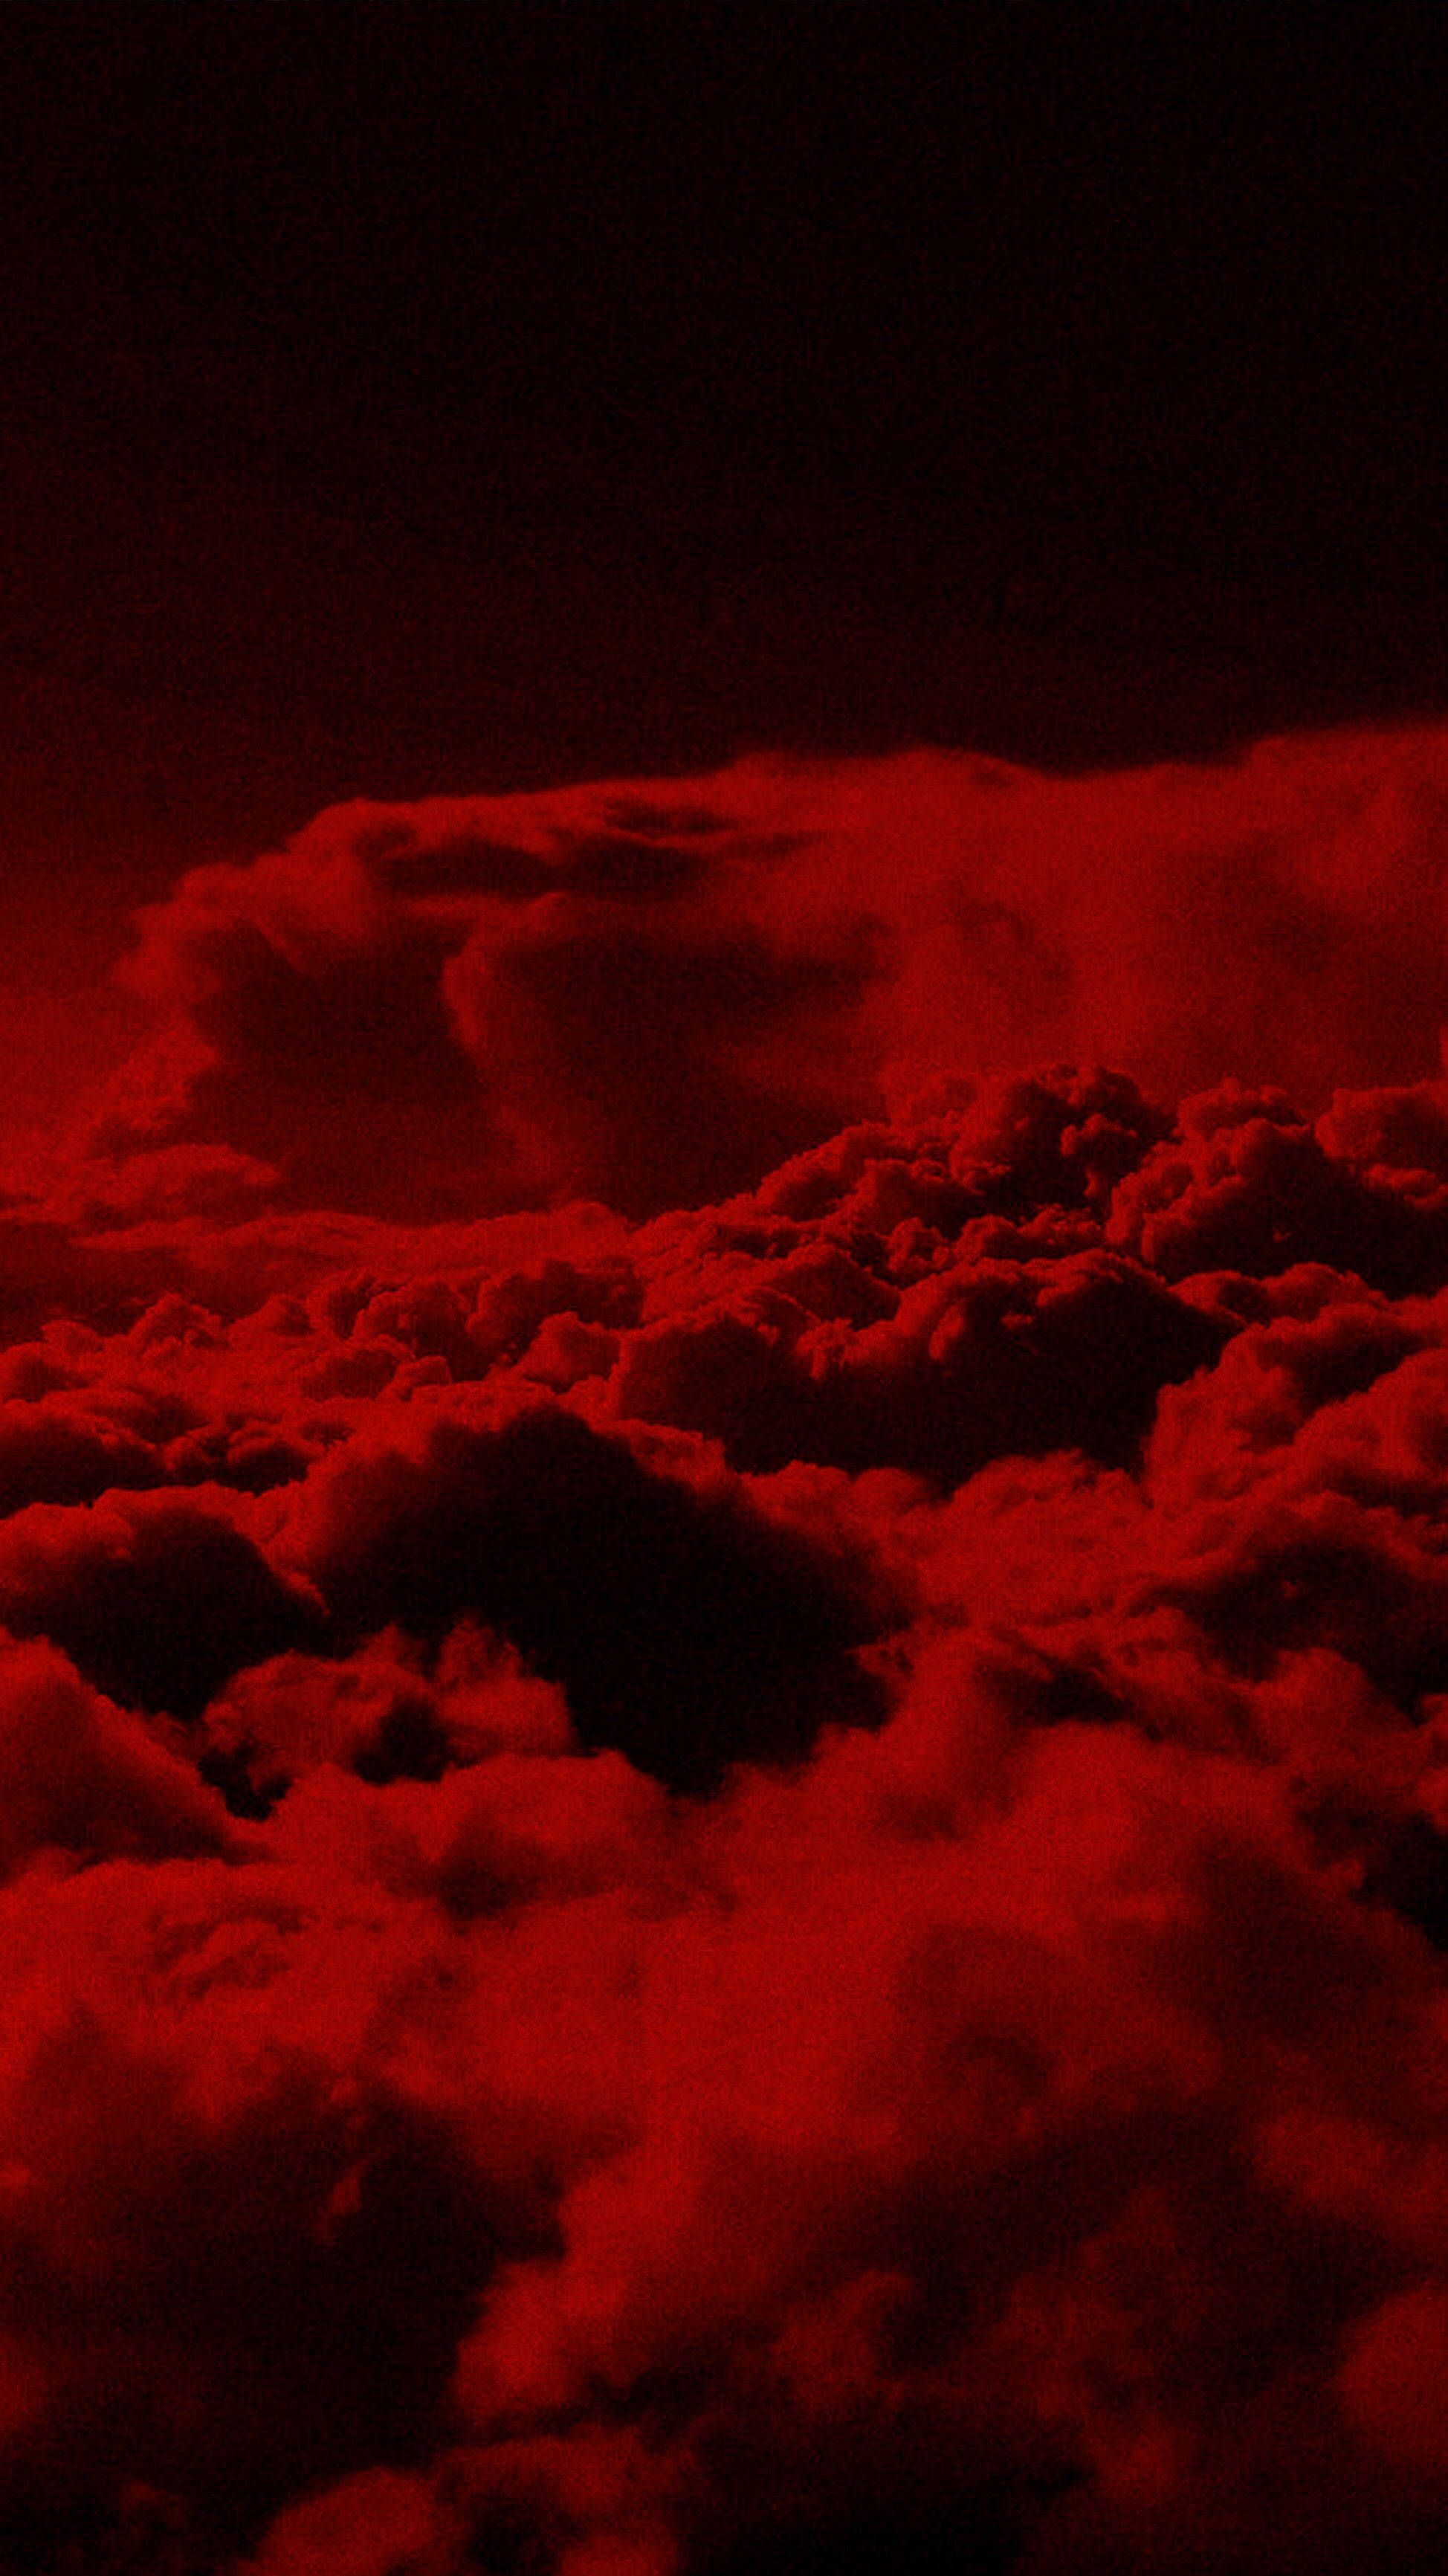 A red sky with clouds and an airplane - Red, iPhone red, dark red, light red